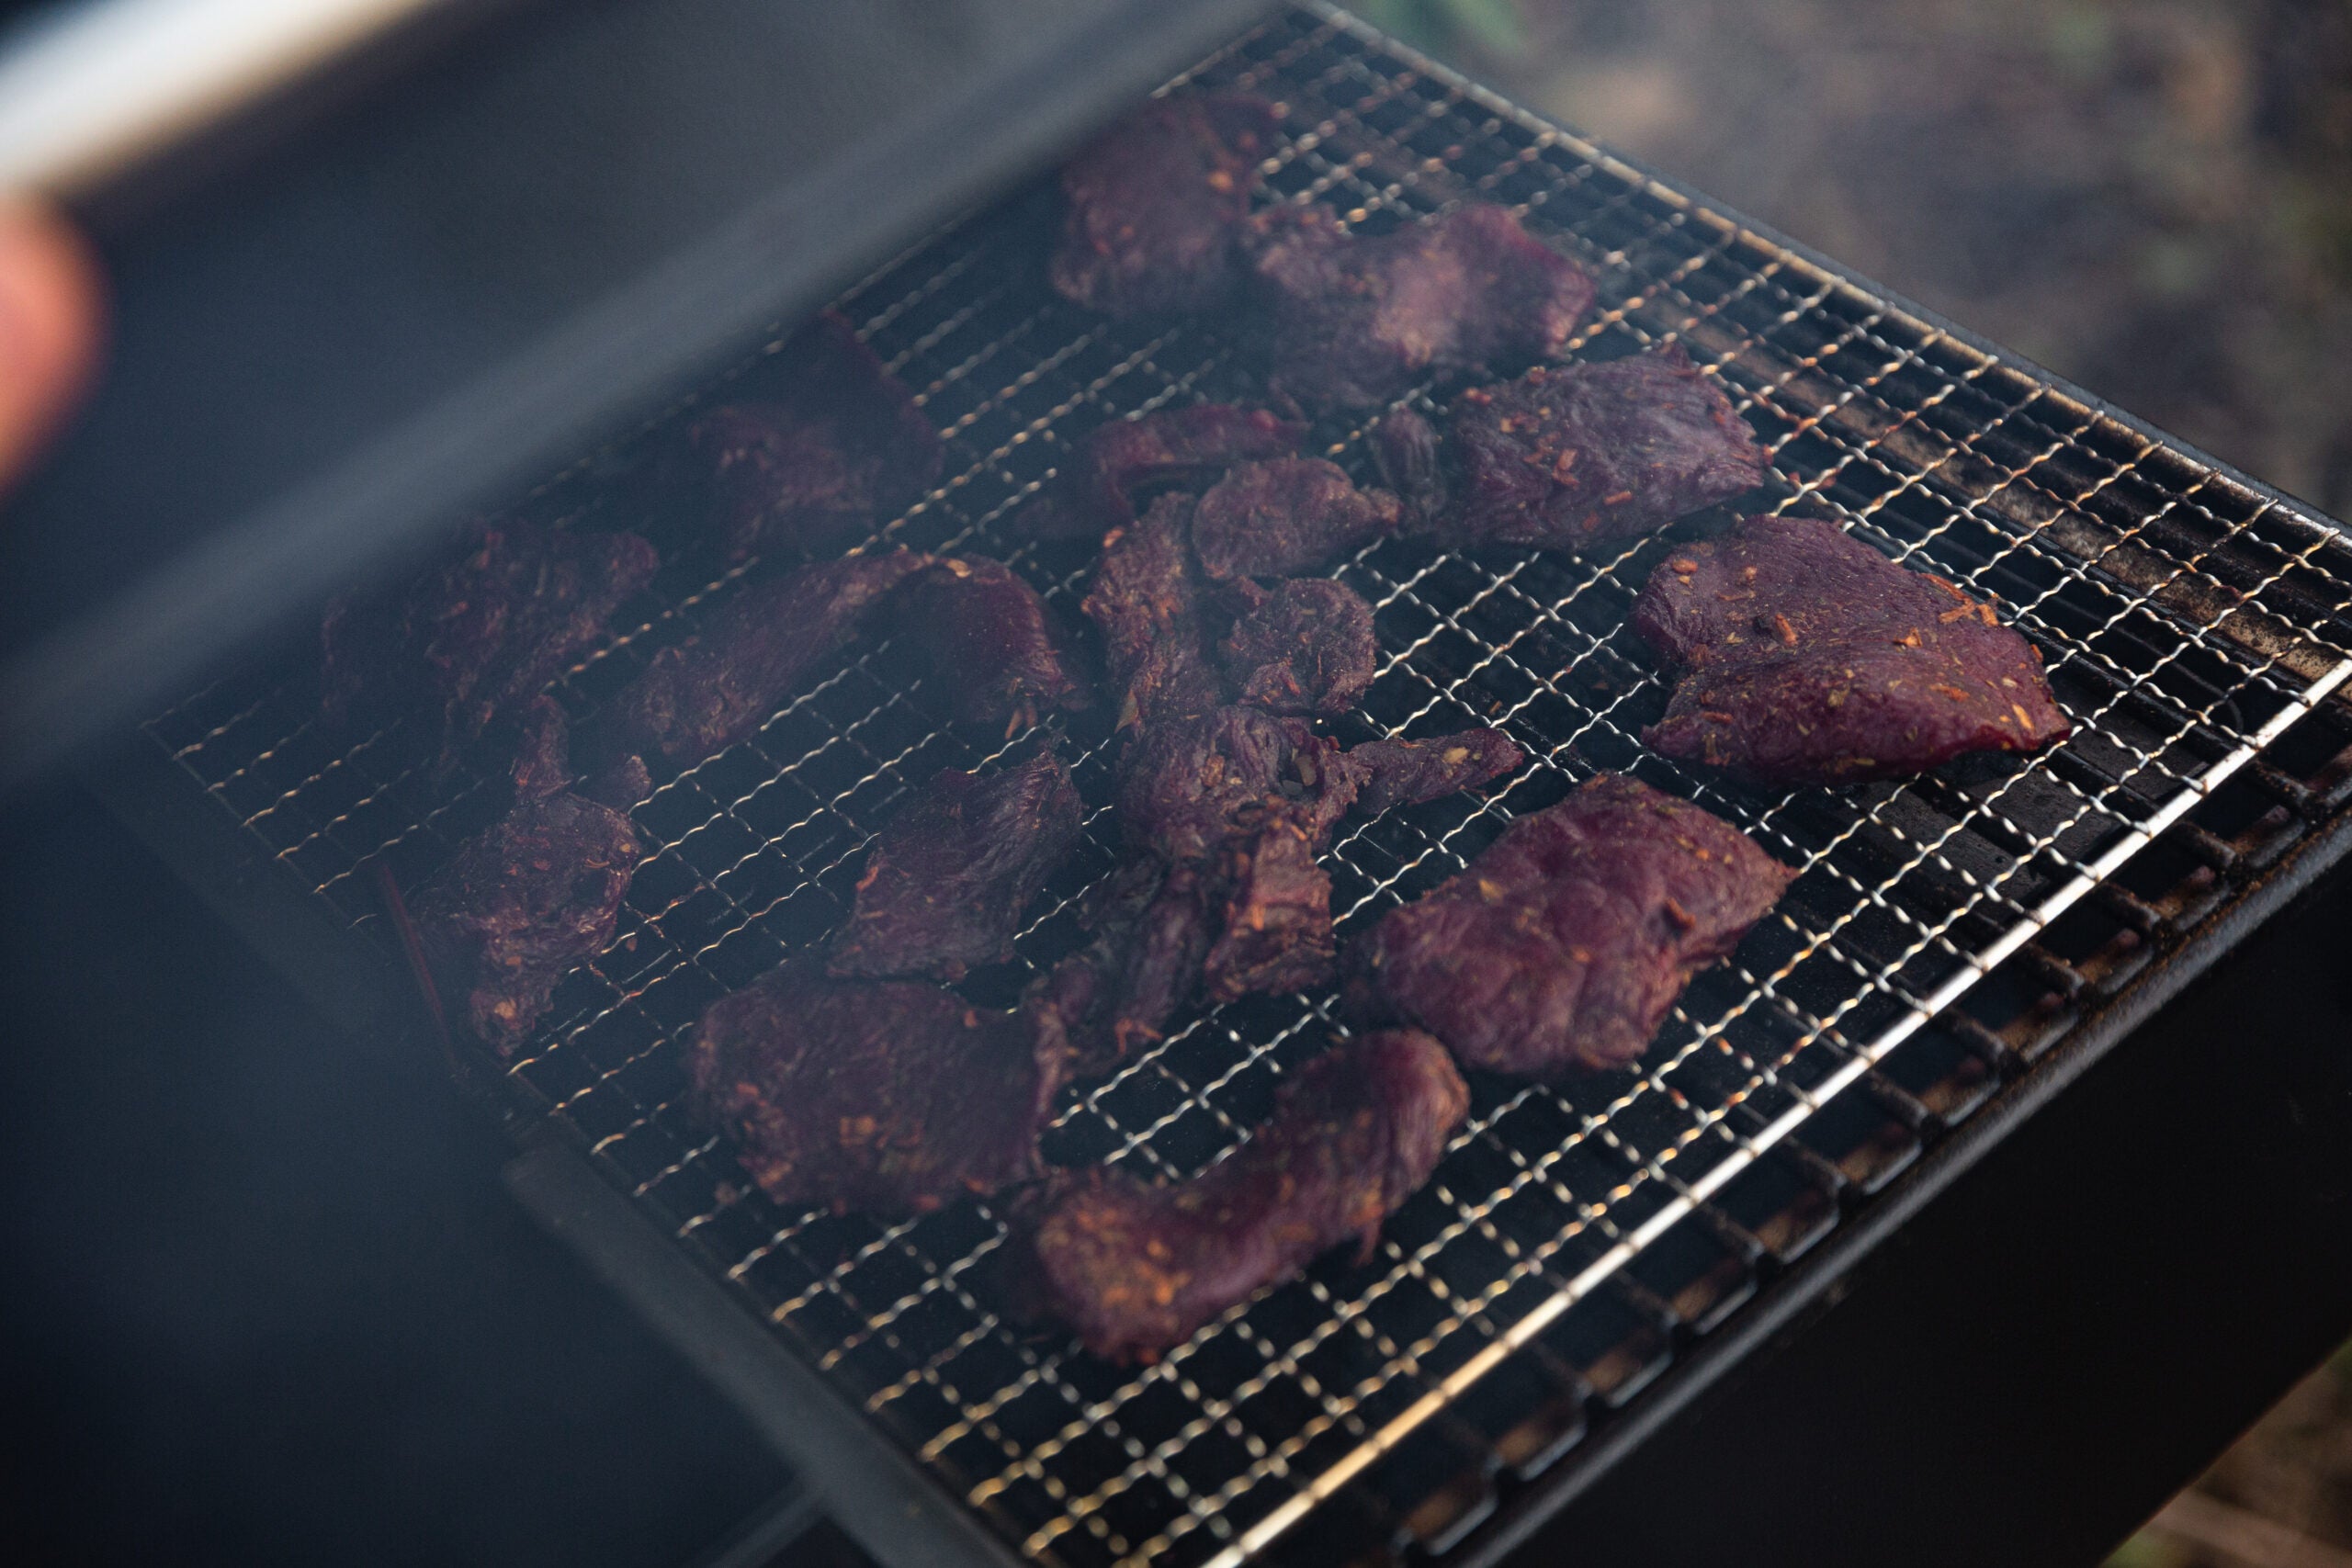 Photo of meat in a pellet grill